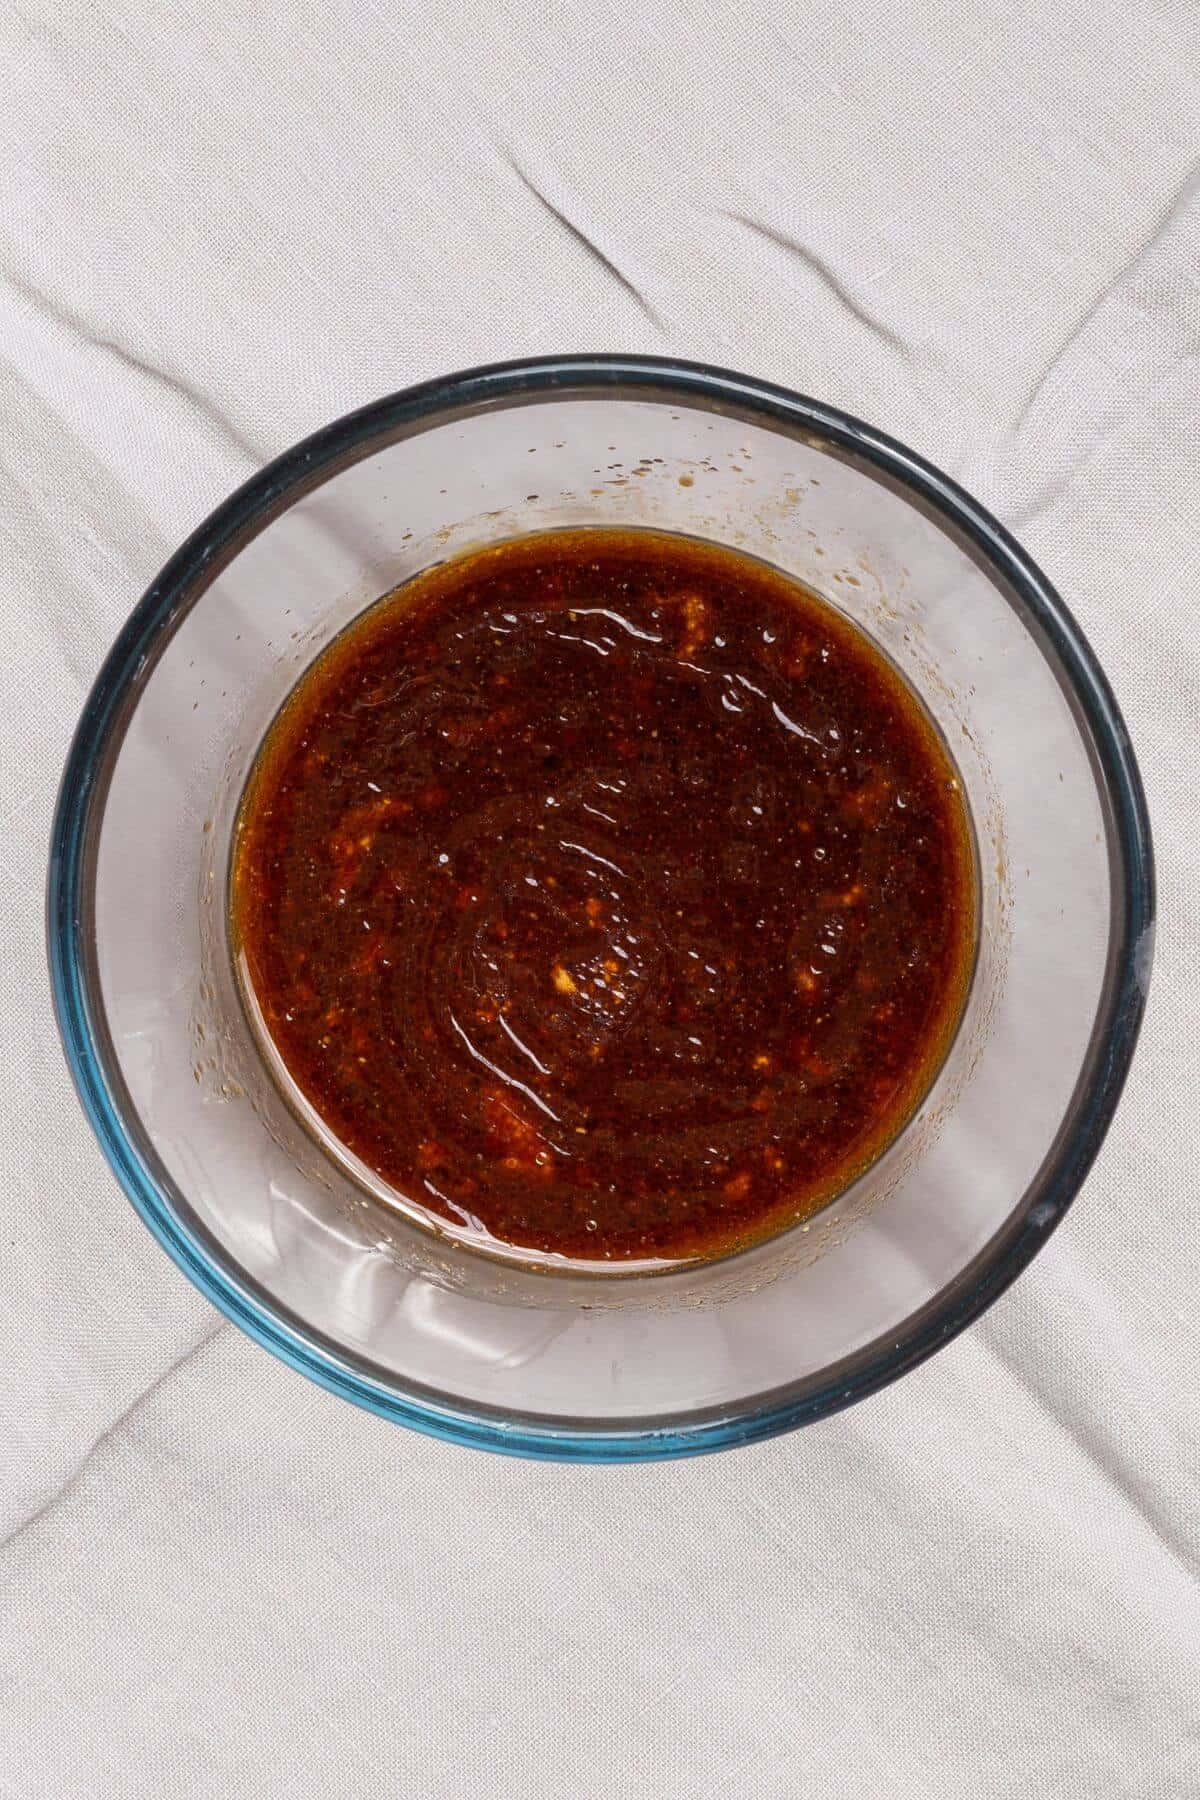 A bowl of sauce on a white cloth.